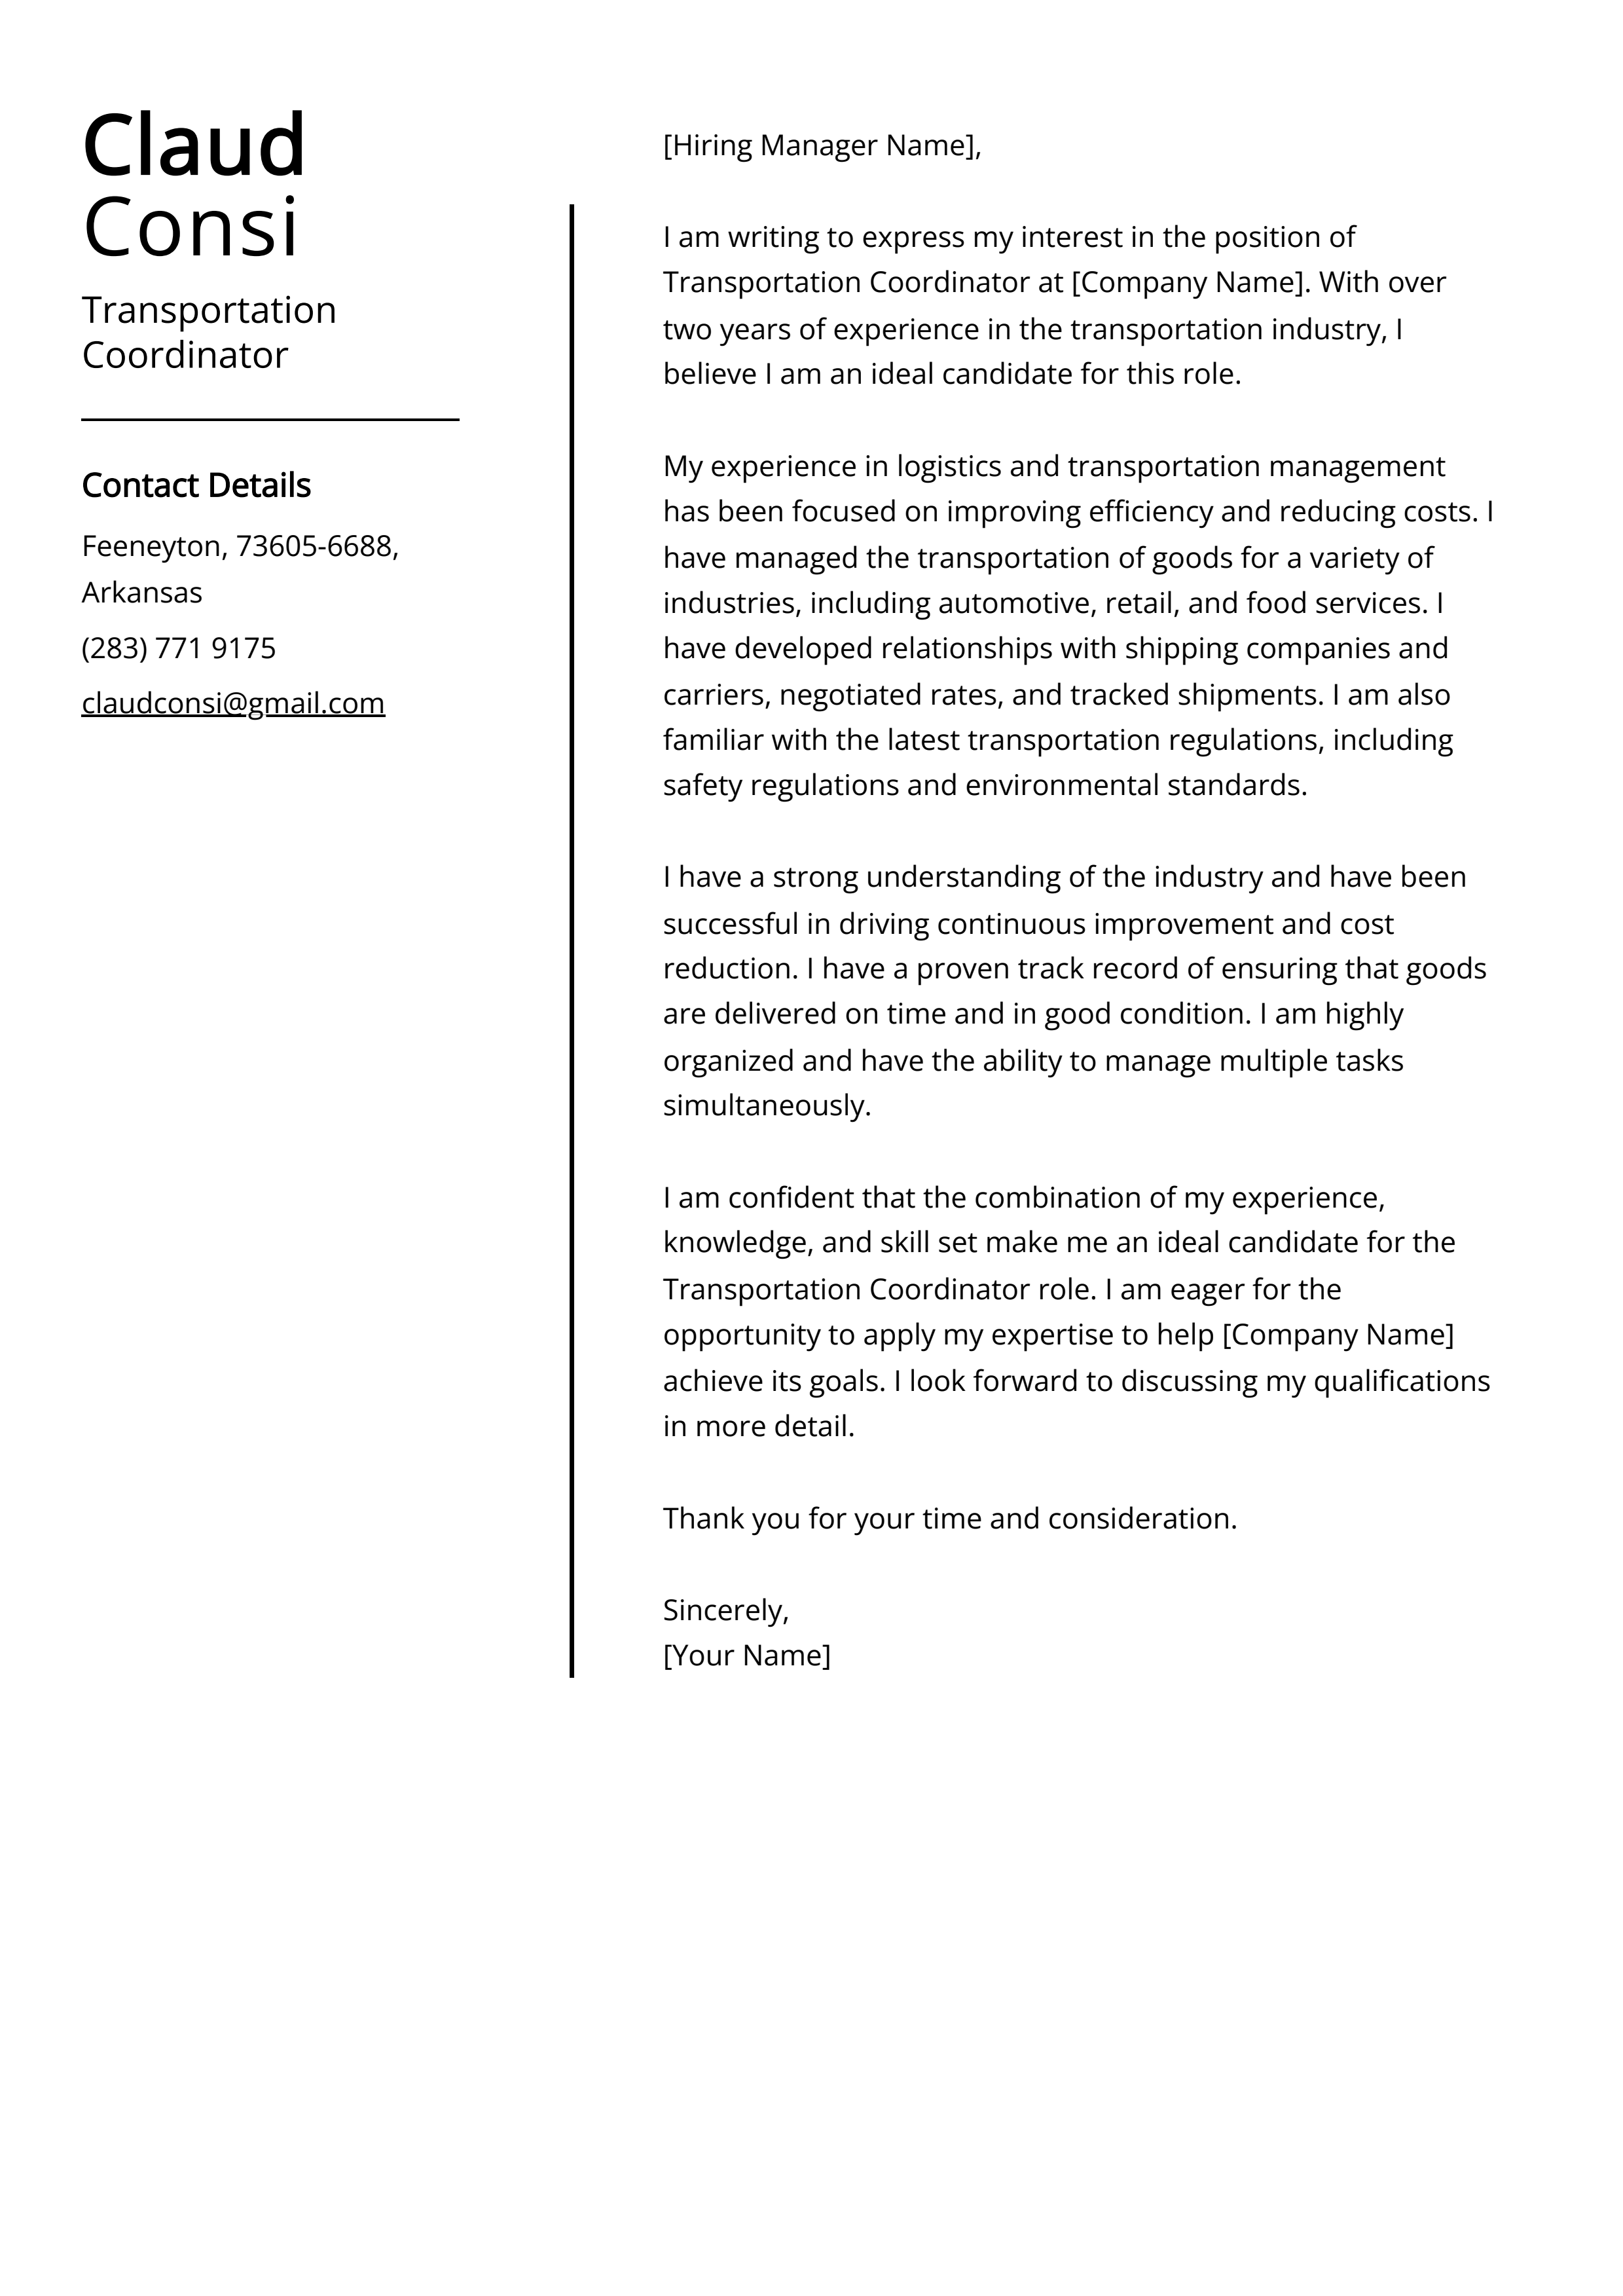 Transportation Coordinator Cover Letter Example